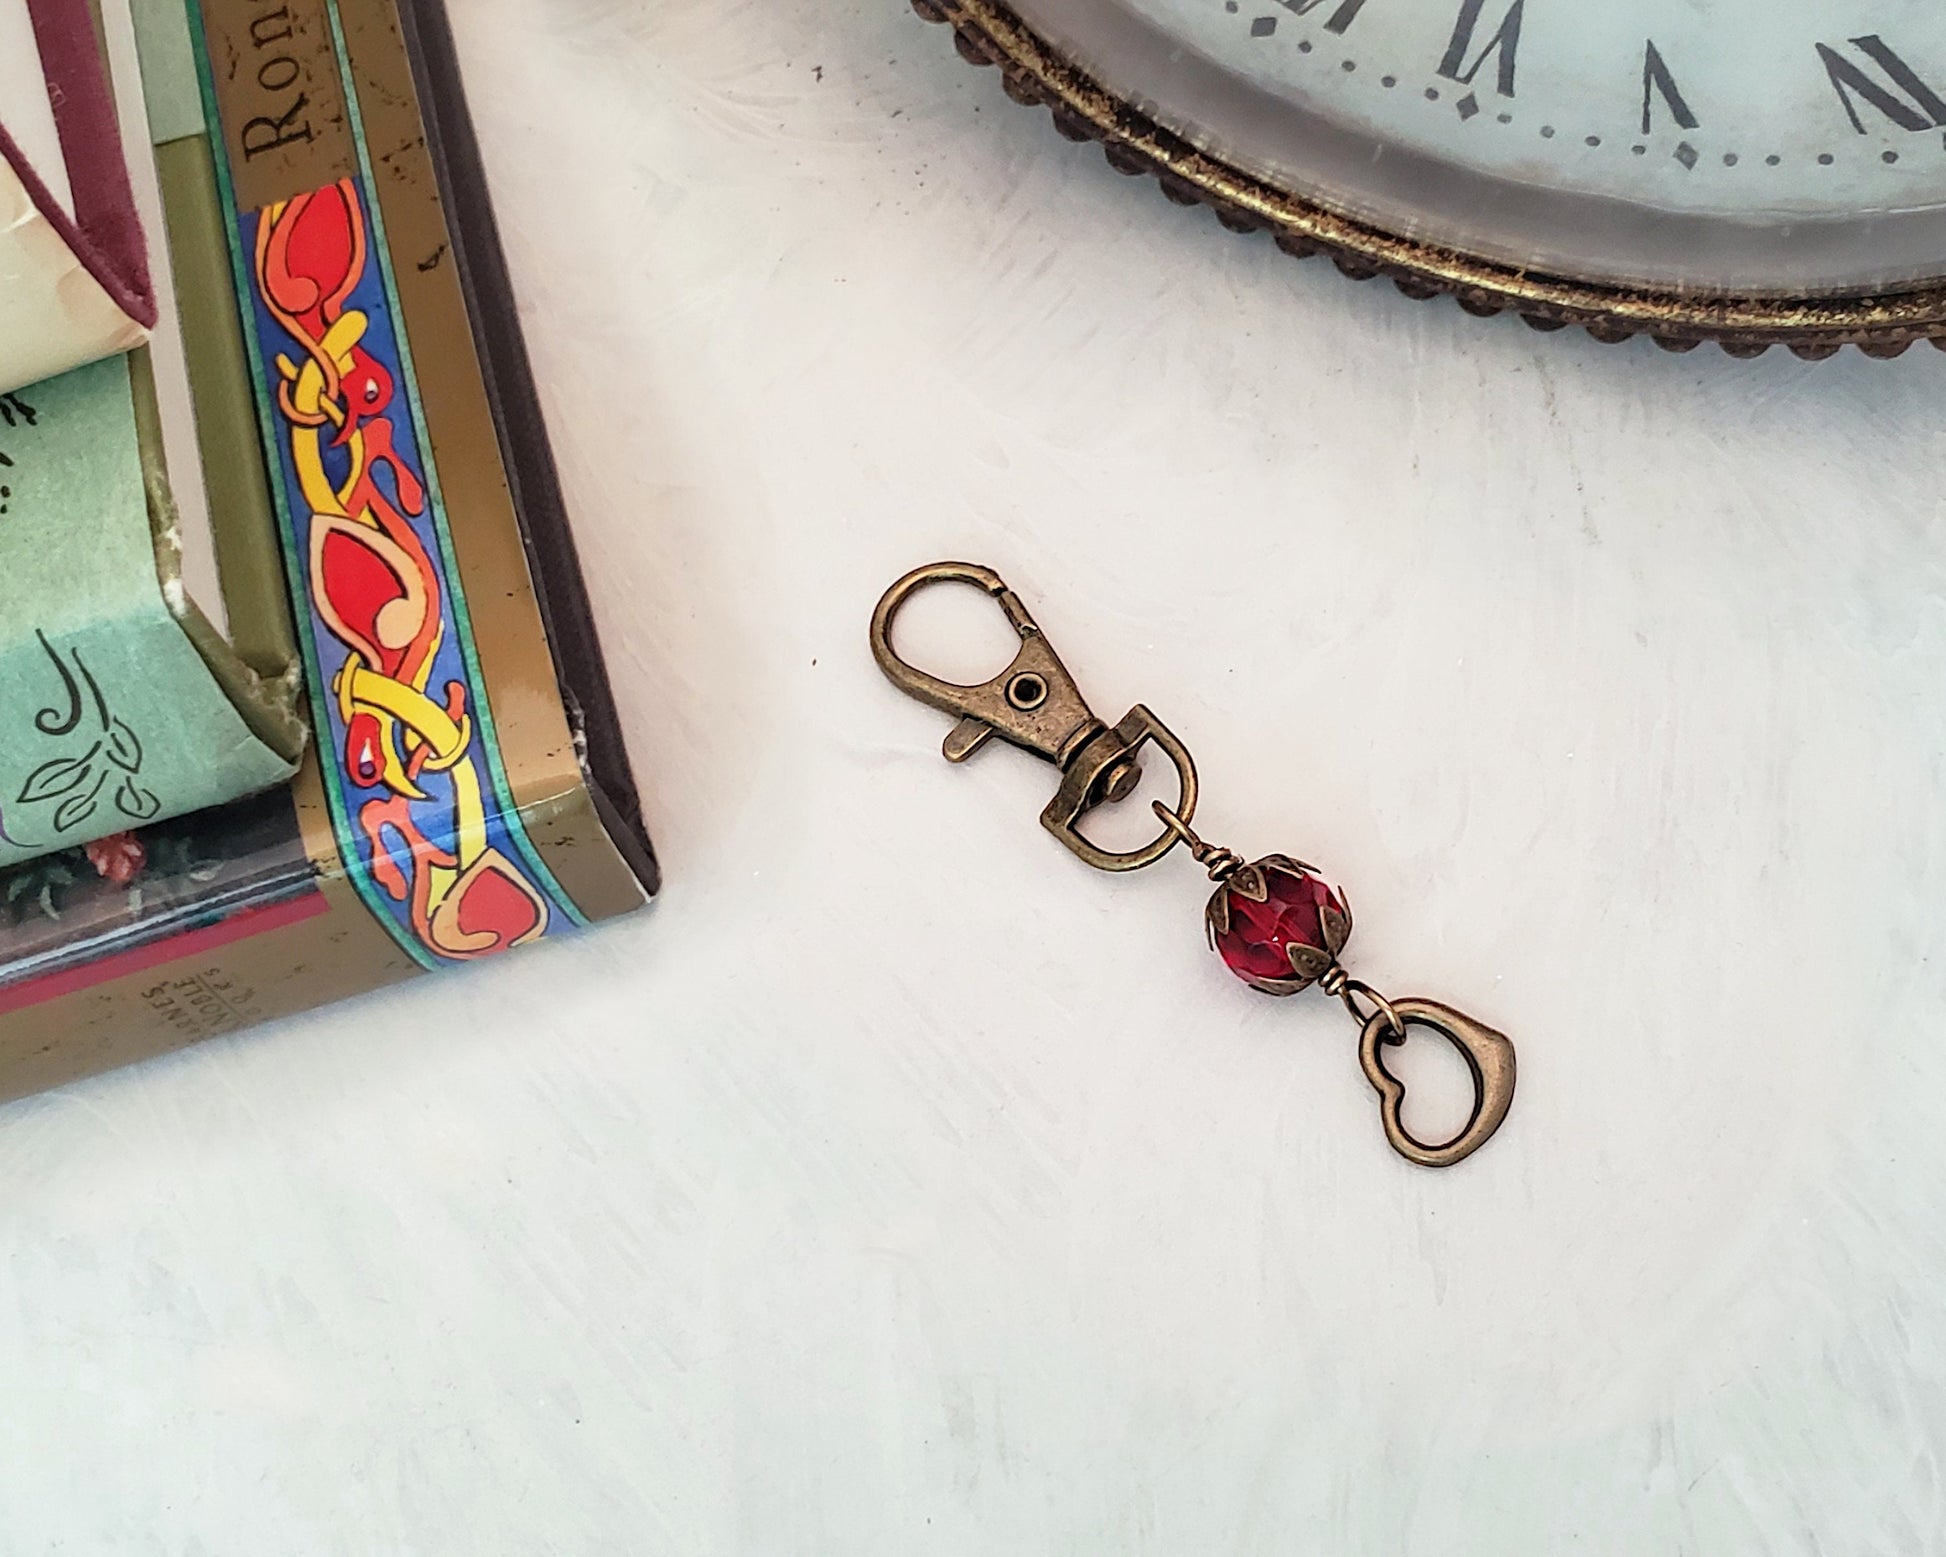 Wire Wrapped Clip or Purse Charm in Antique Bronze, Red with Heart Charm, Cellphone Charm, Choice of Colors and Metals